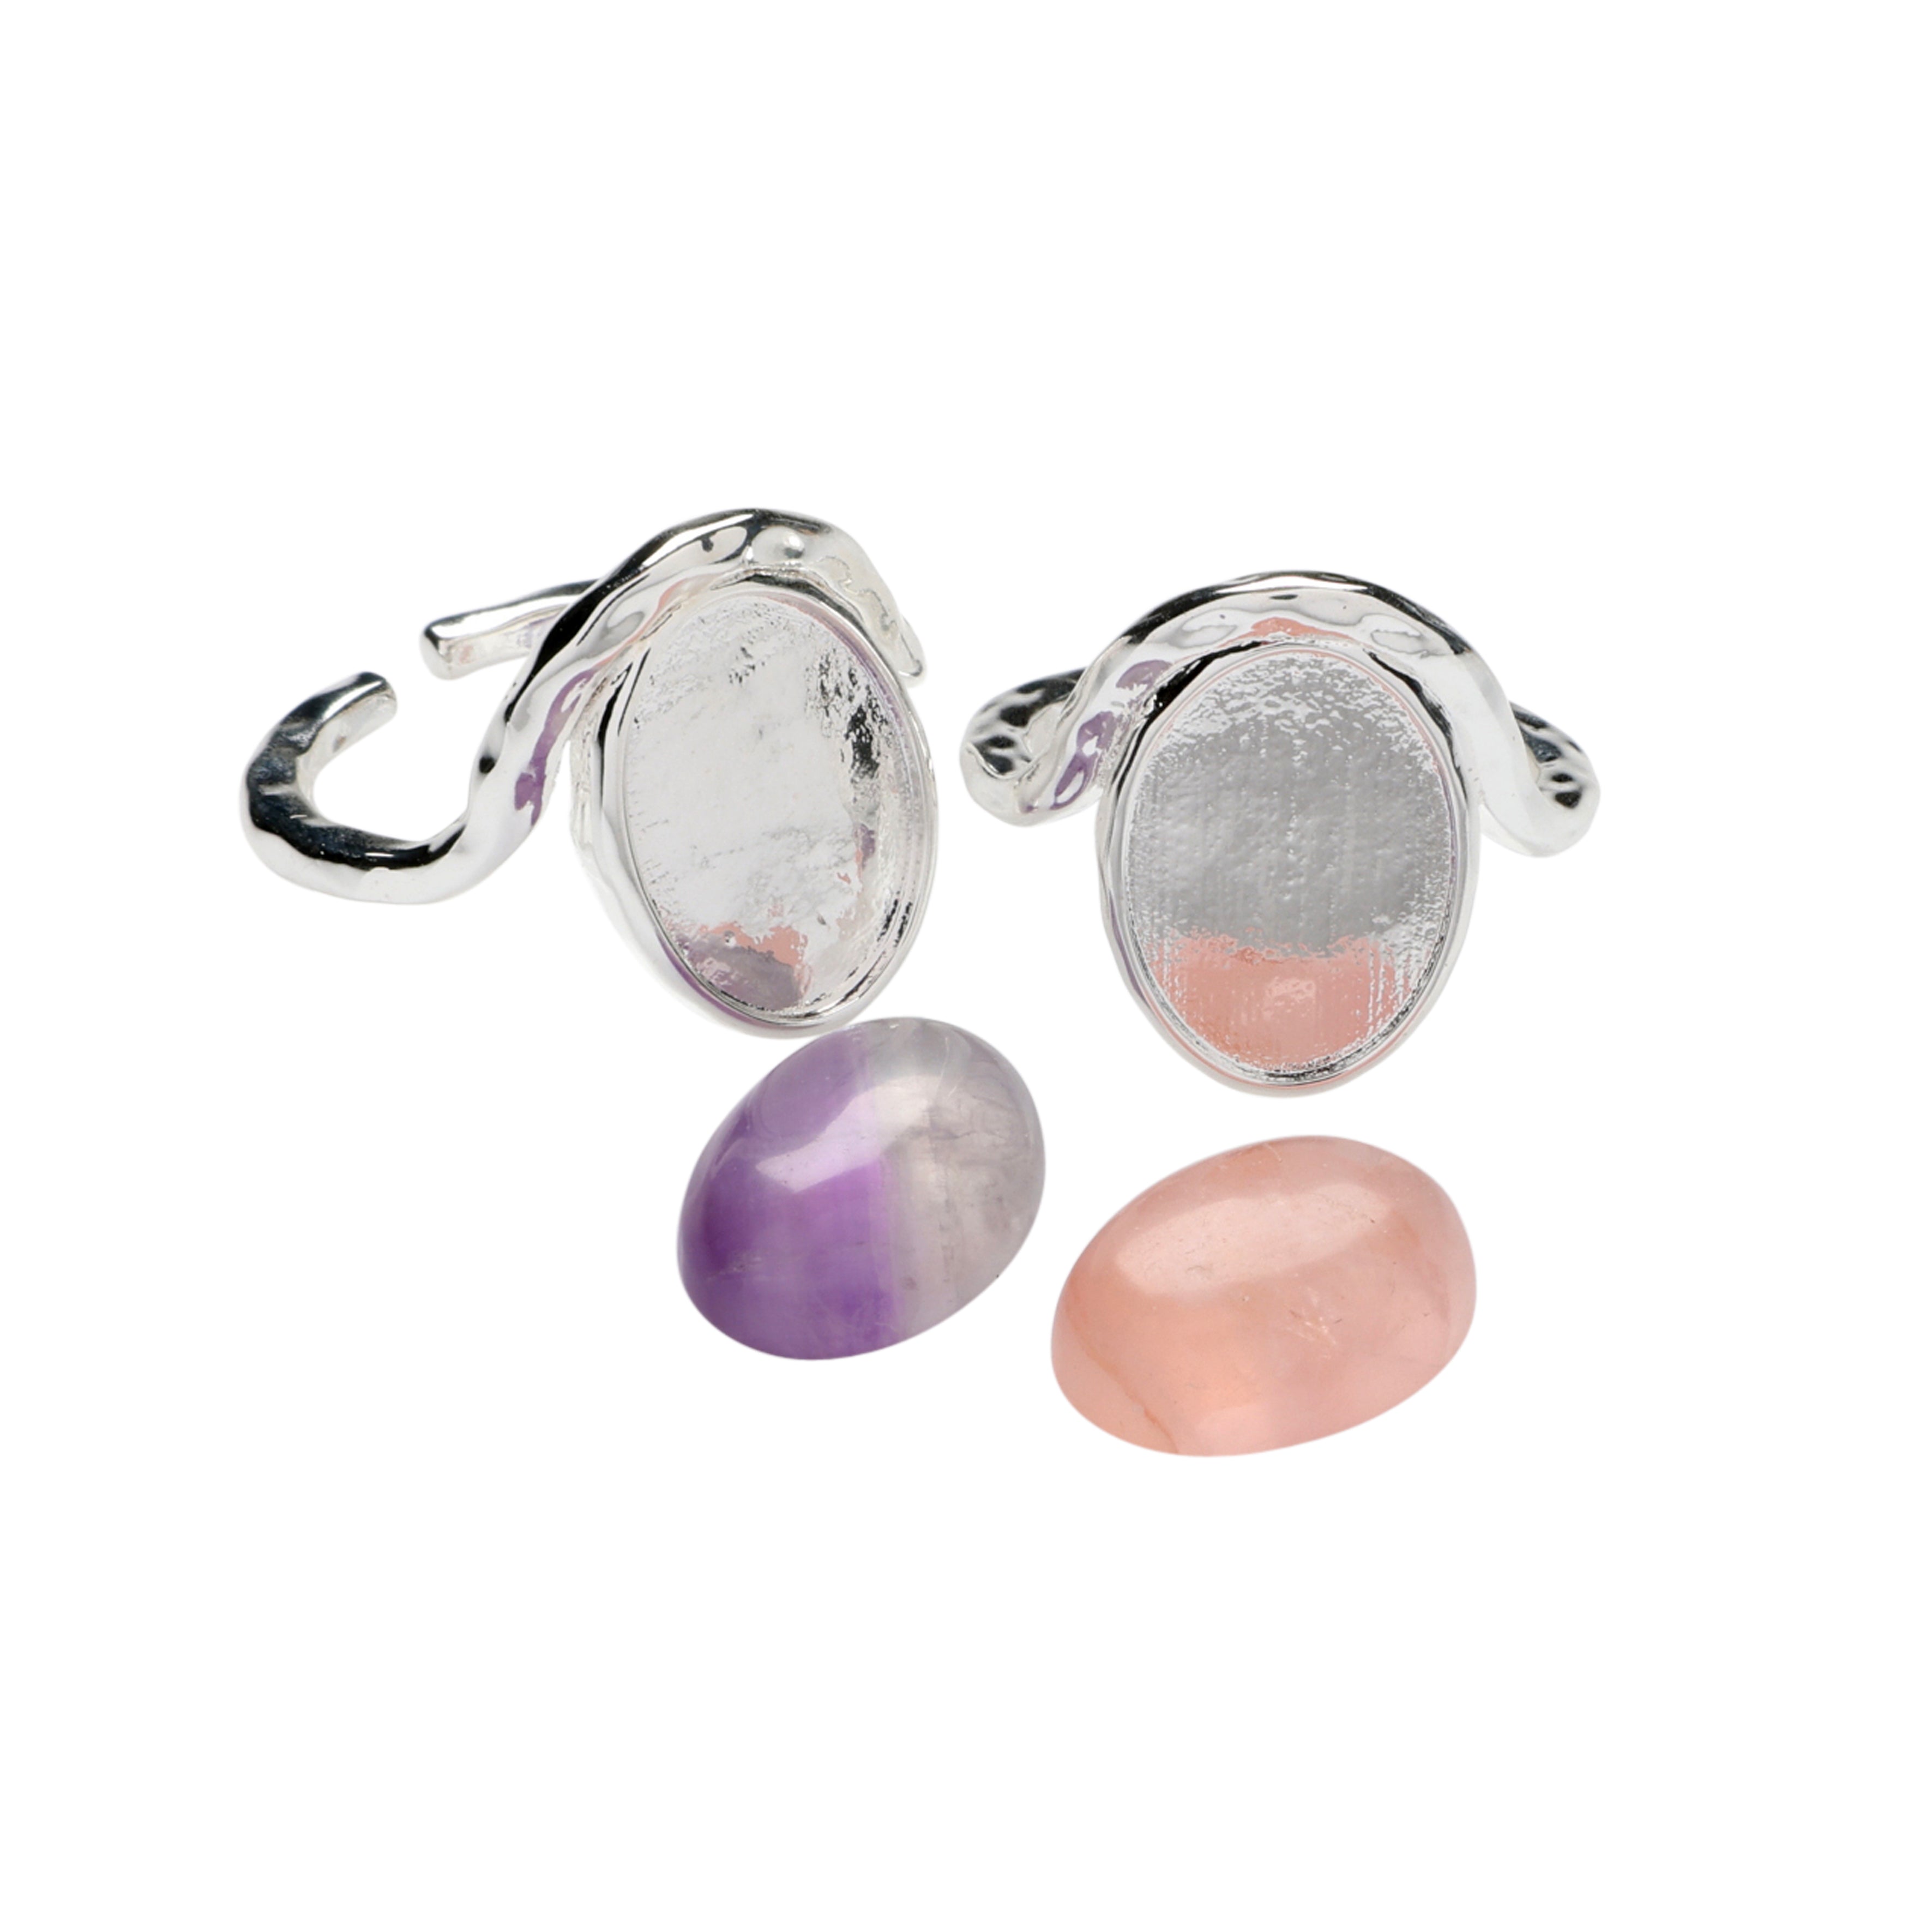 Finger Ring, 925S Sterling Silver Plated x 2, Size 52 + 56 + 1 pc. Amethyst and 1 pc. Rose Quartz